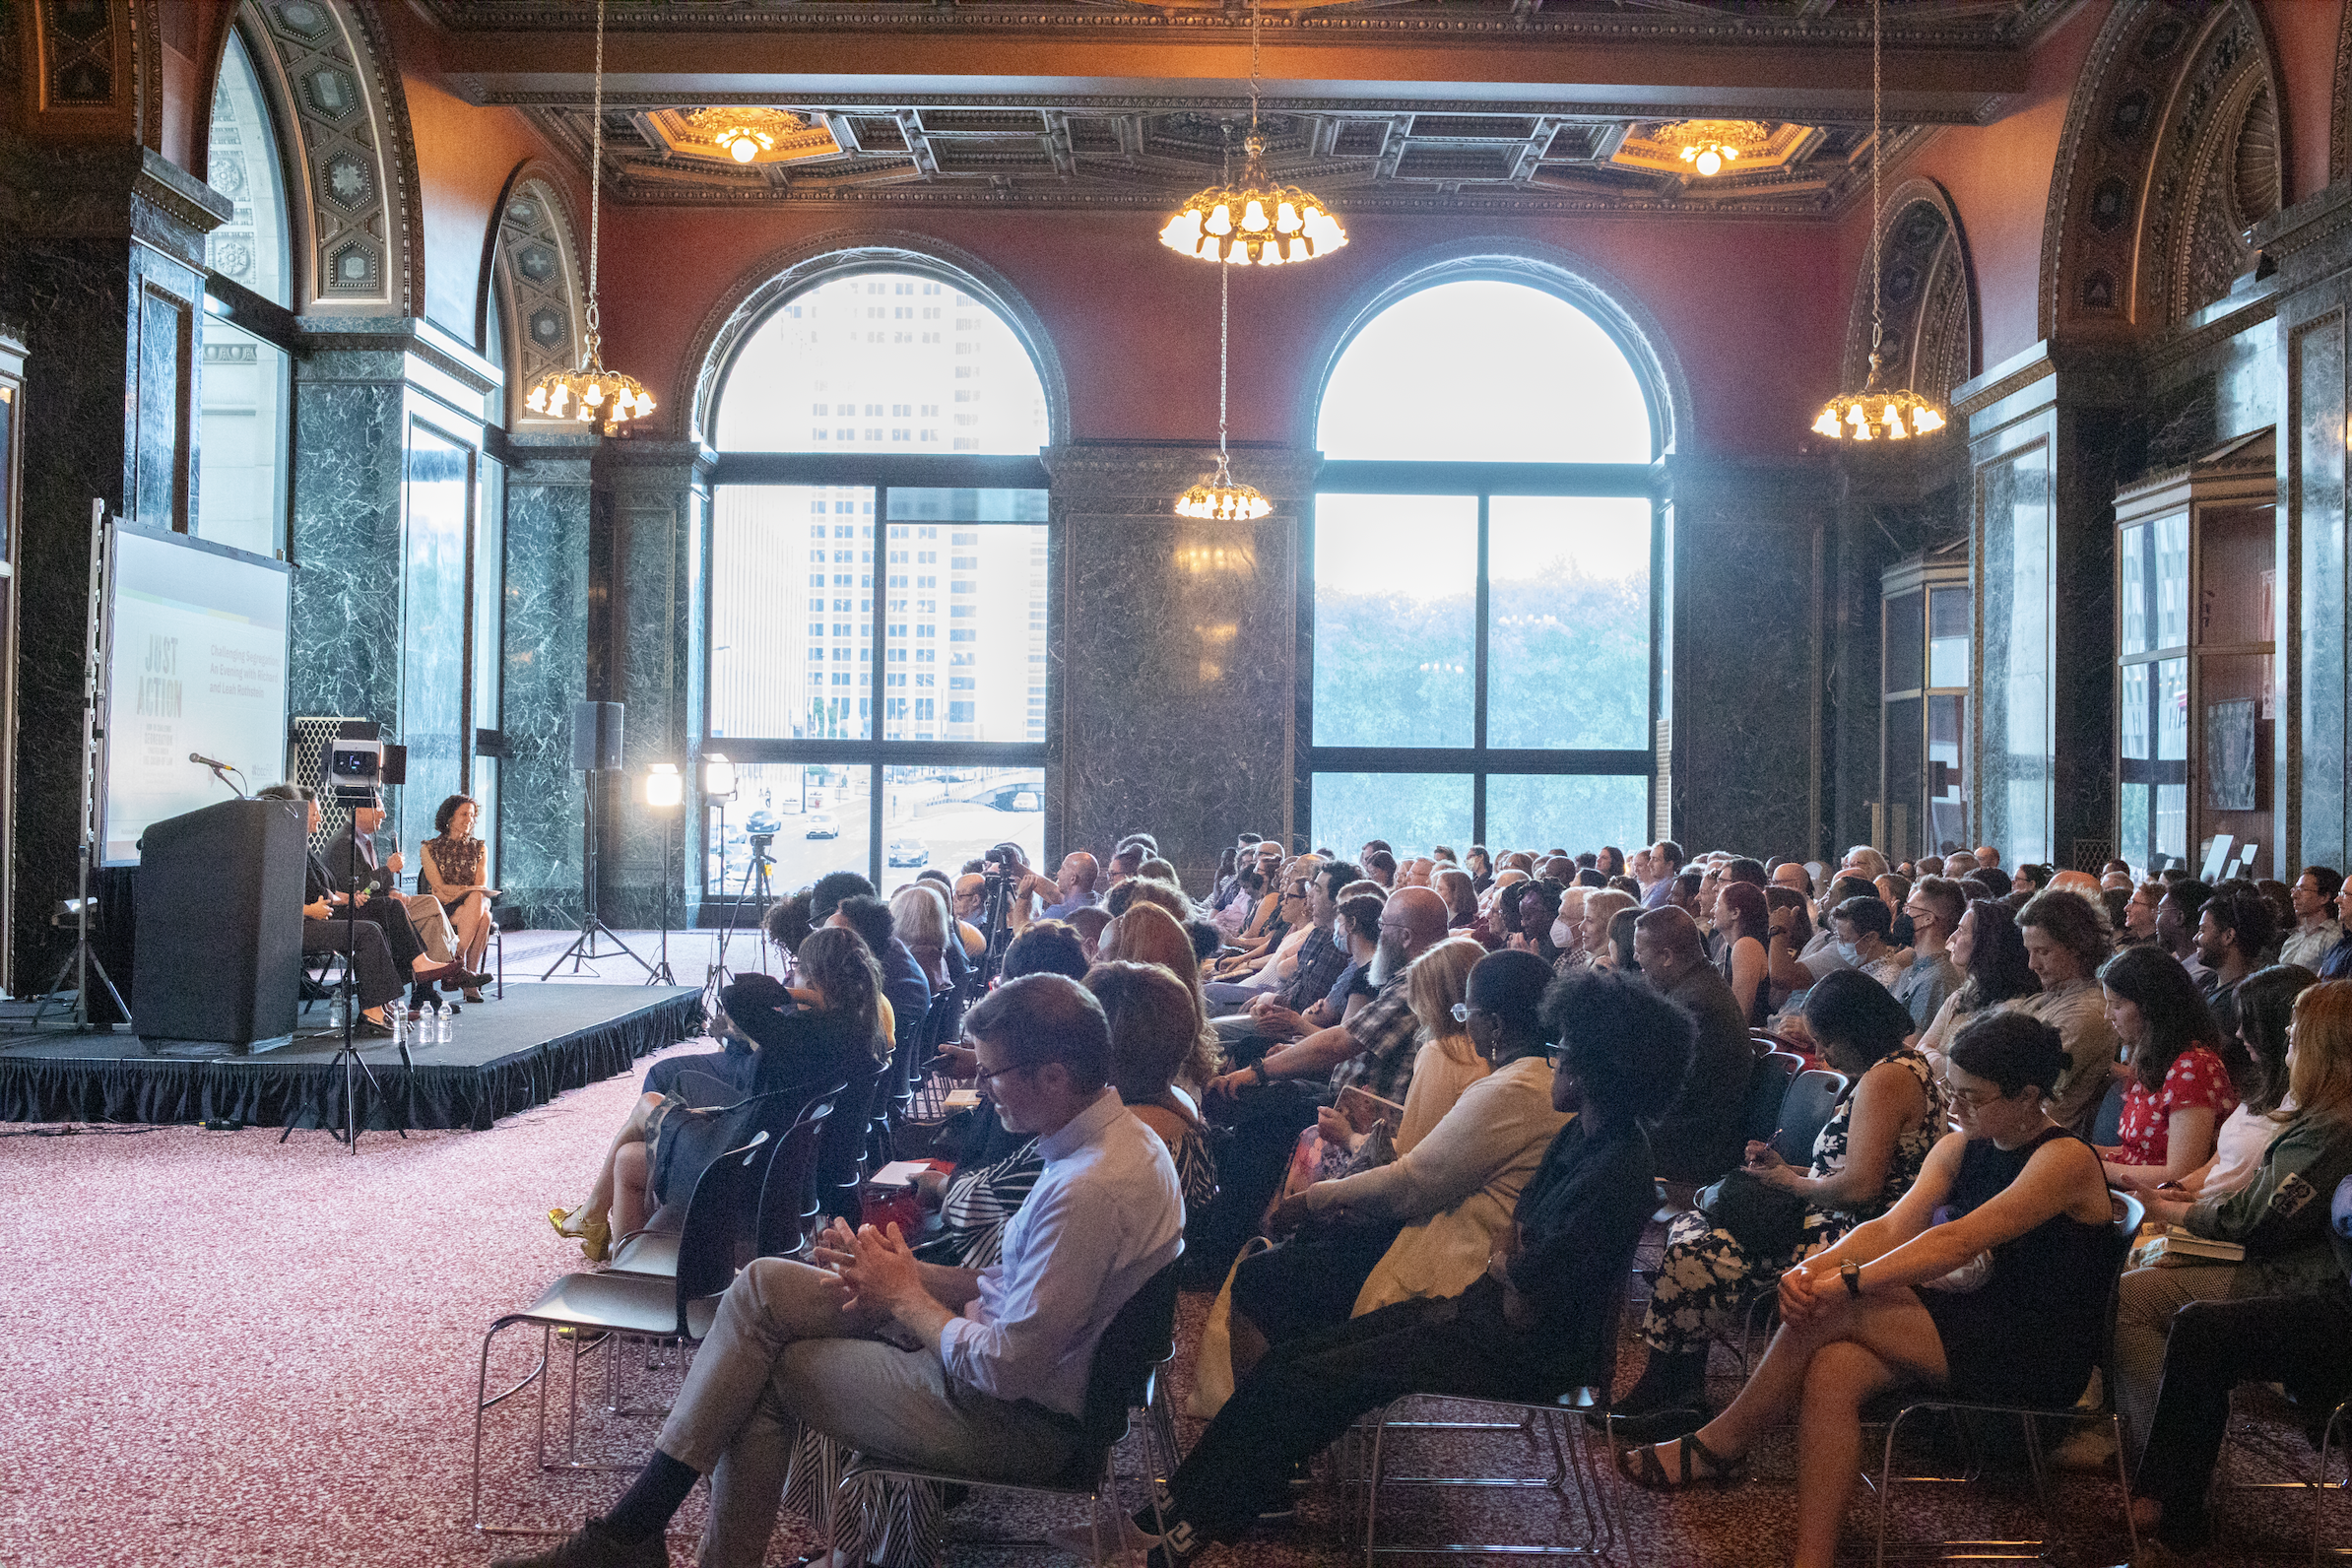  A crowd sits in the Chicago Cultural Center’s G.A.R. Hall, an ornate room with soaring ceilings and large windows. 